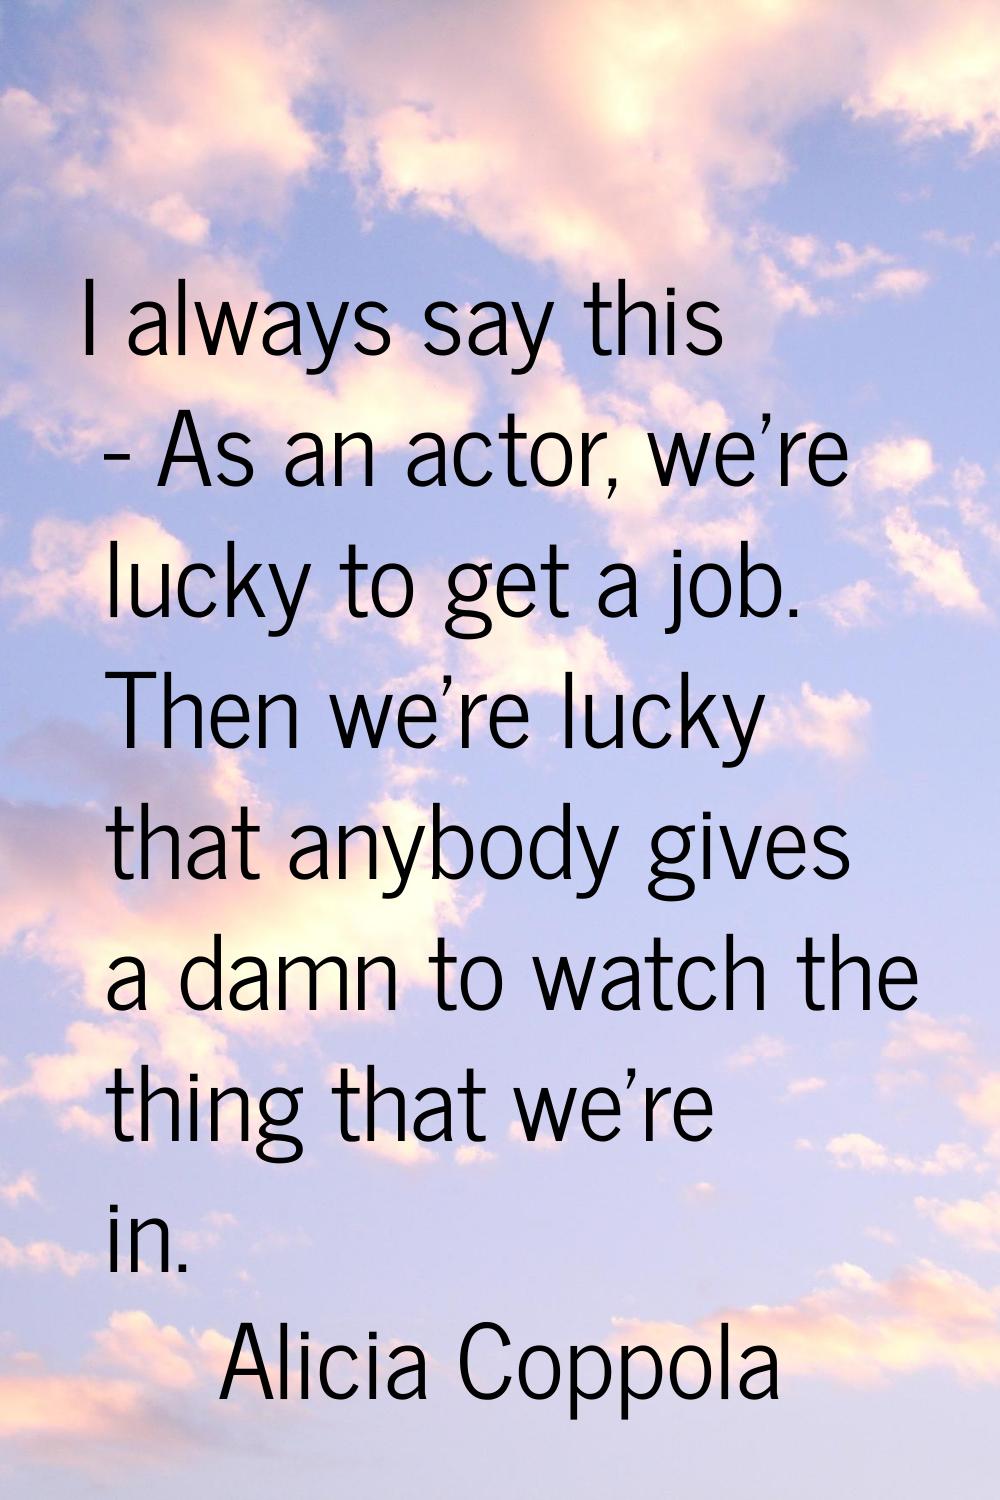 I always say this - As an actor, we're lucky to get a job. Then we're lucky that anybody gives a da